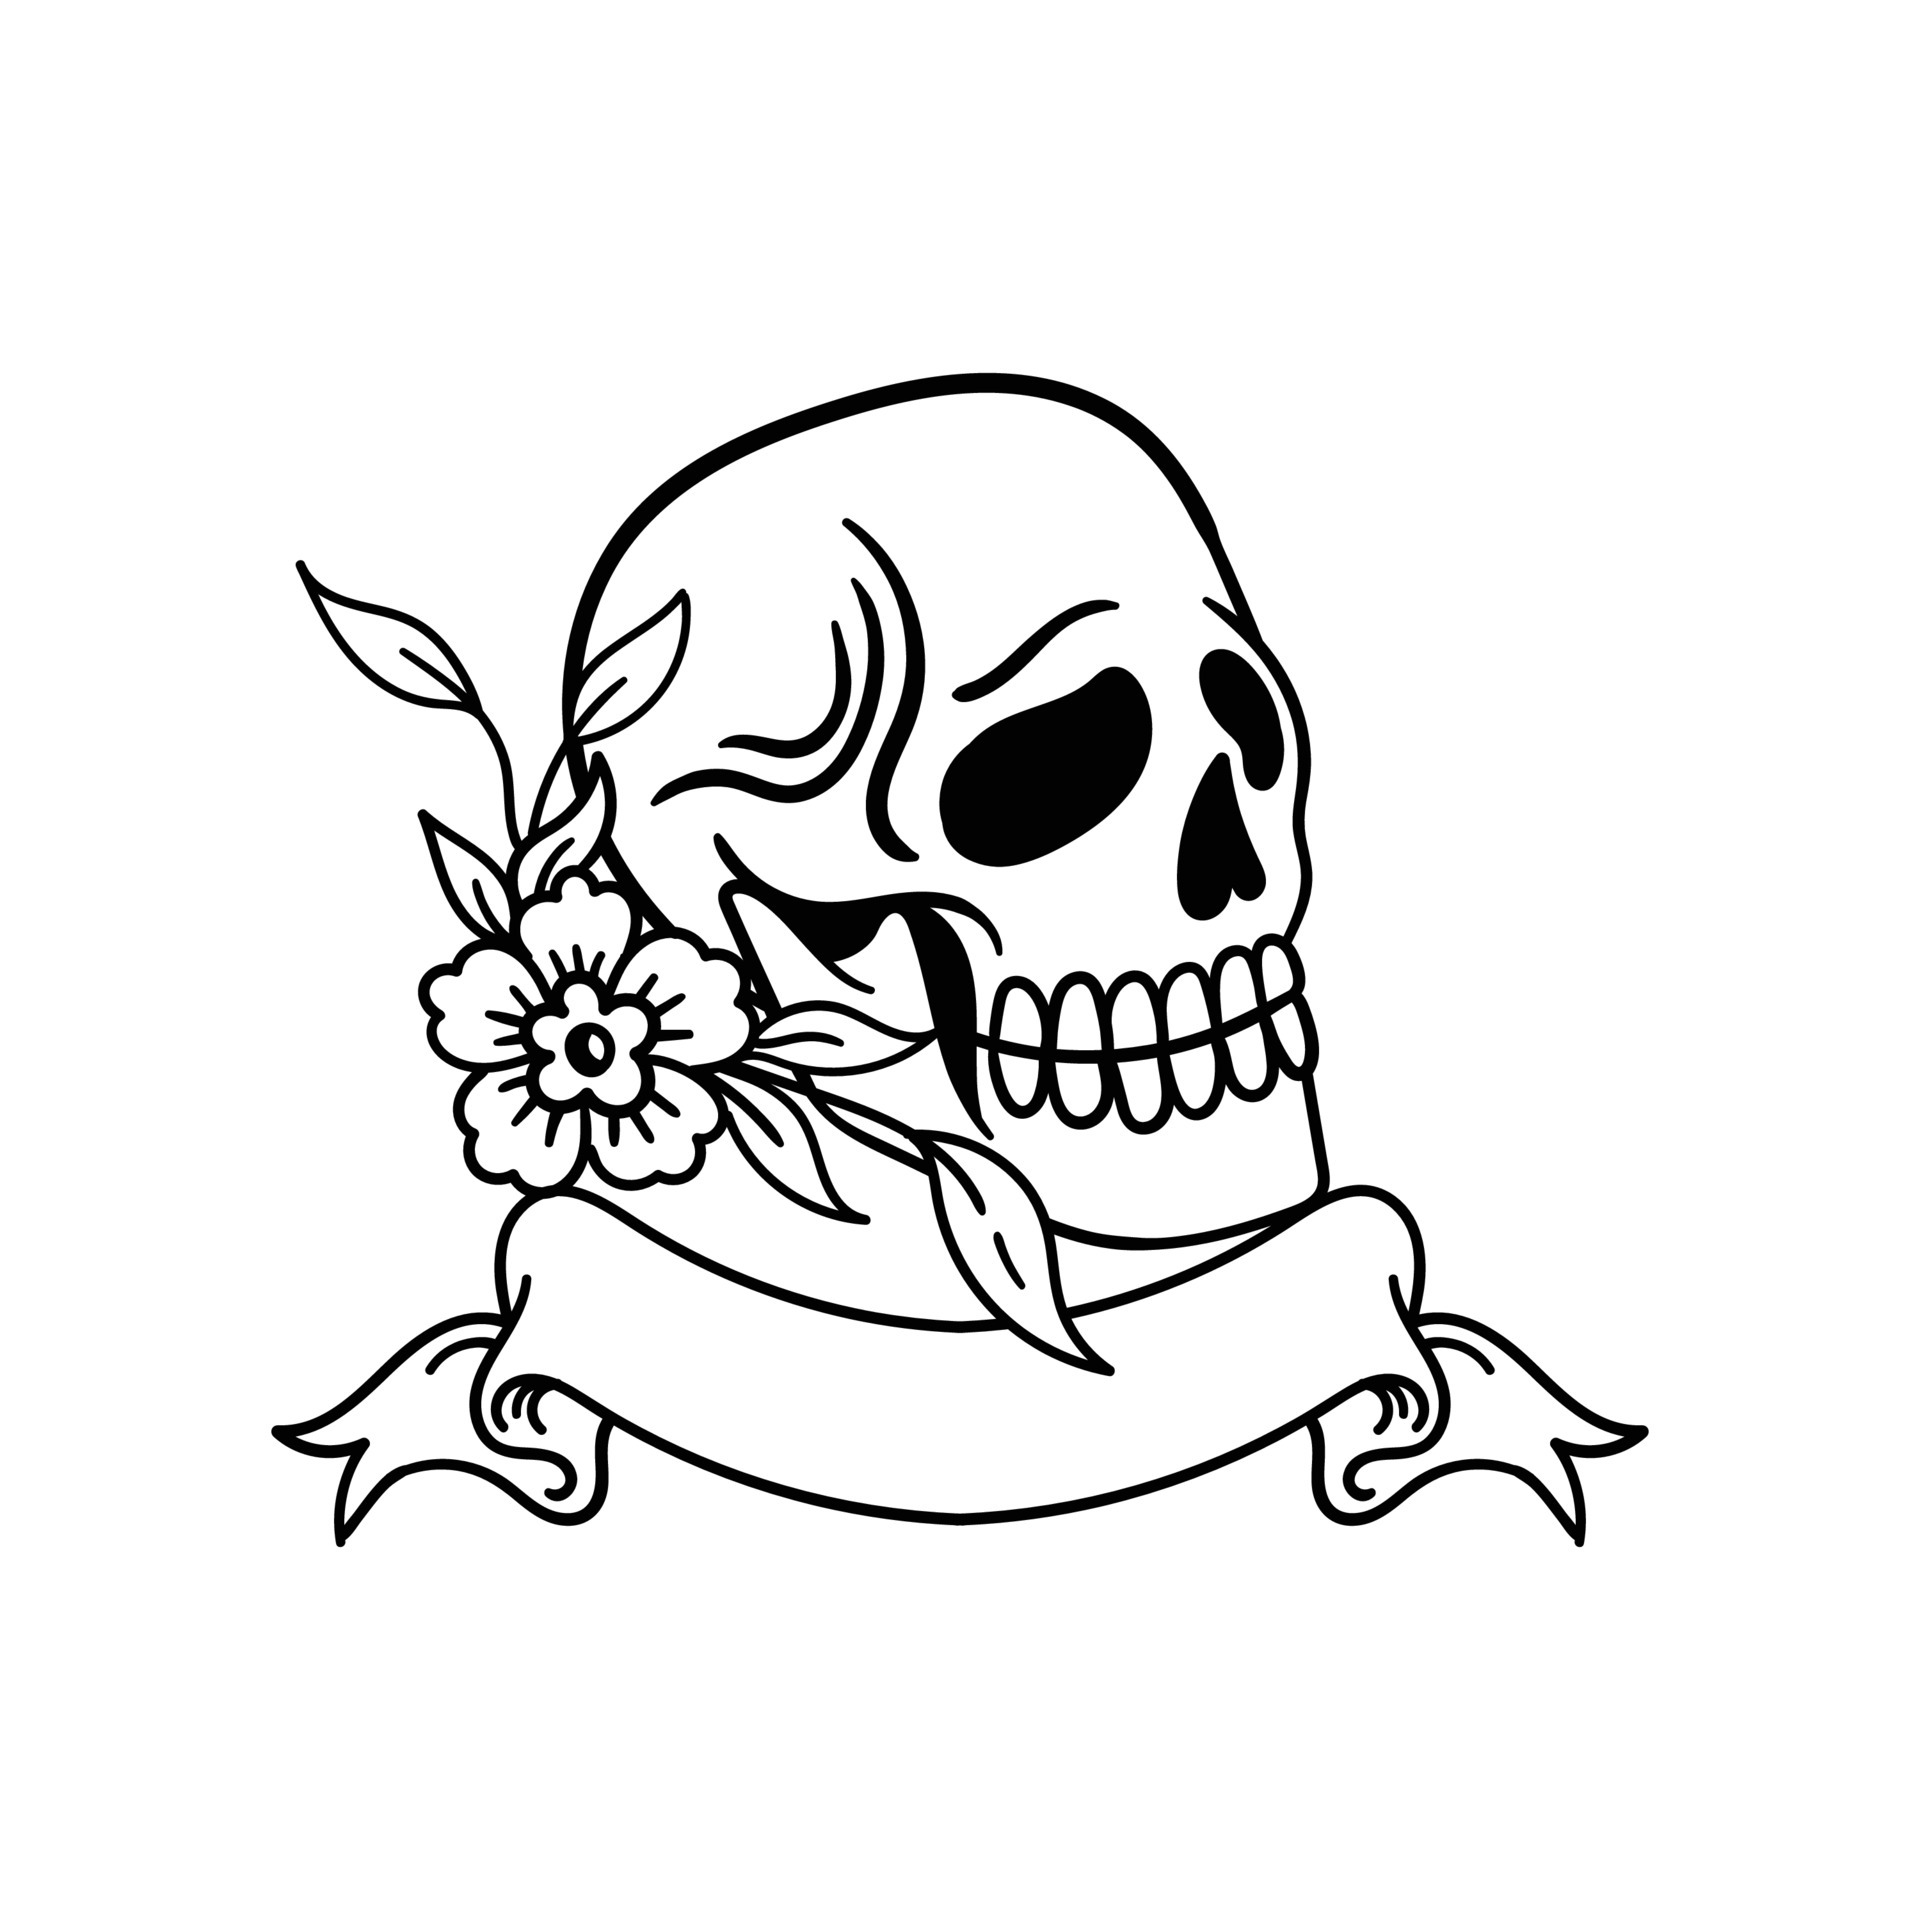 Tattoo Art Skull and Flower Hand Drawing and Sketch Black and White Stock  Vector  Illustration of white skeleton 243437188